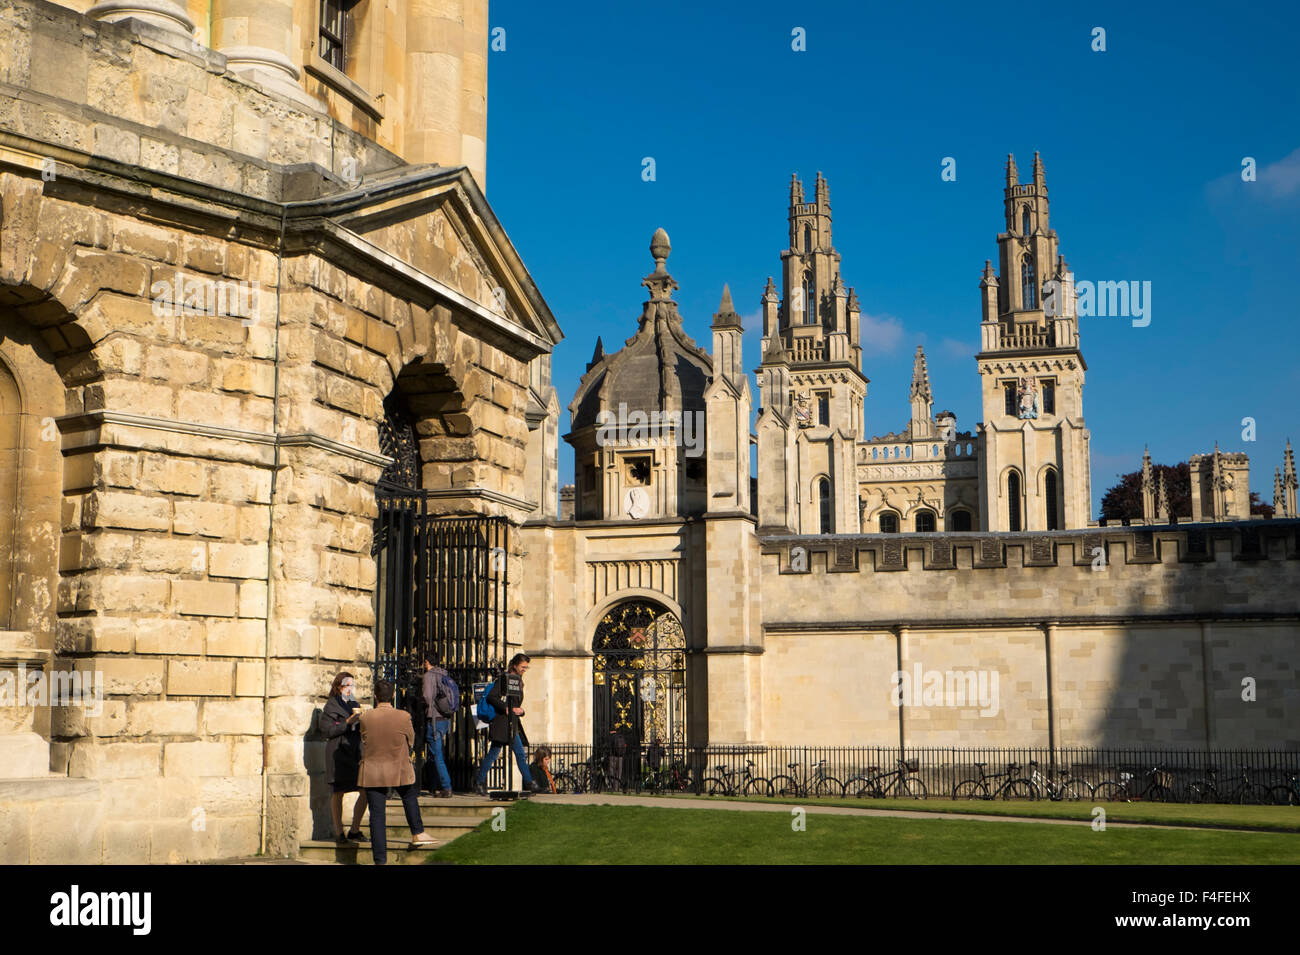 A visit to the historic University City of Oxford Oxfordshire England UK Radcliffe Camera and All Souls College Stock Photo